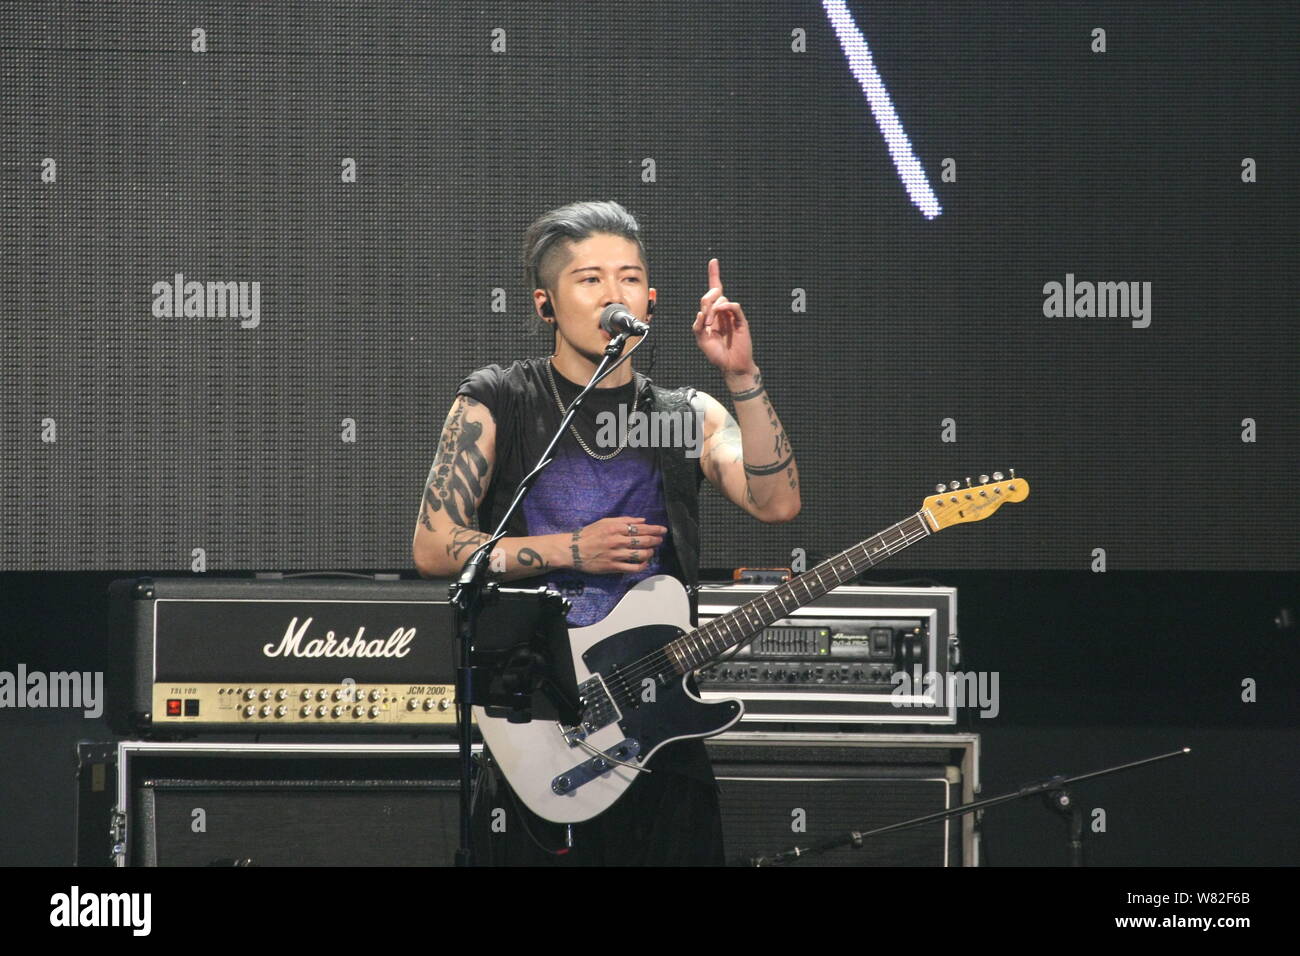 Japanese singer and actor Takamasa Ishihara, better known by his stage name Miyavi, performs during a concert in Taipei, Taiwan, 26 February 2017. Stock Photo